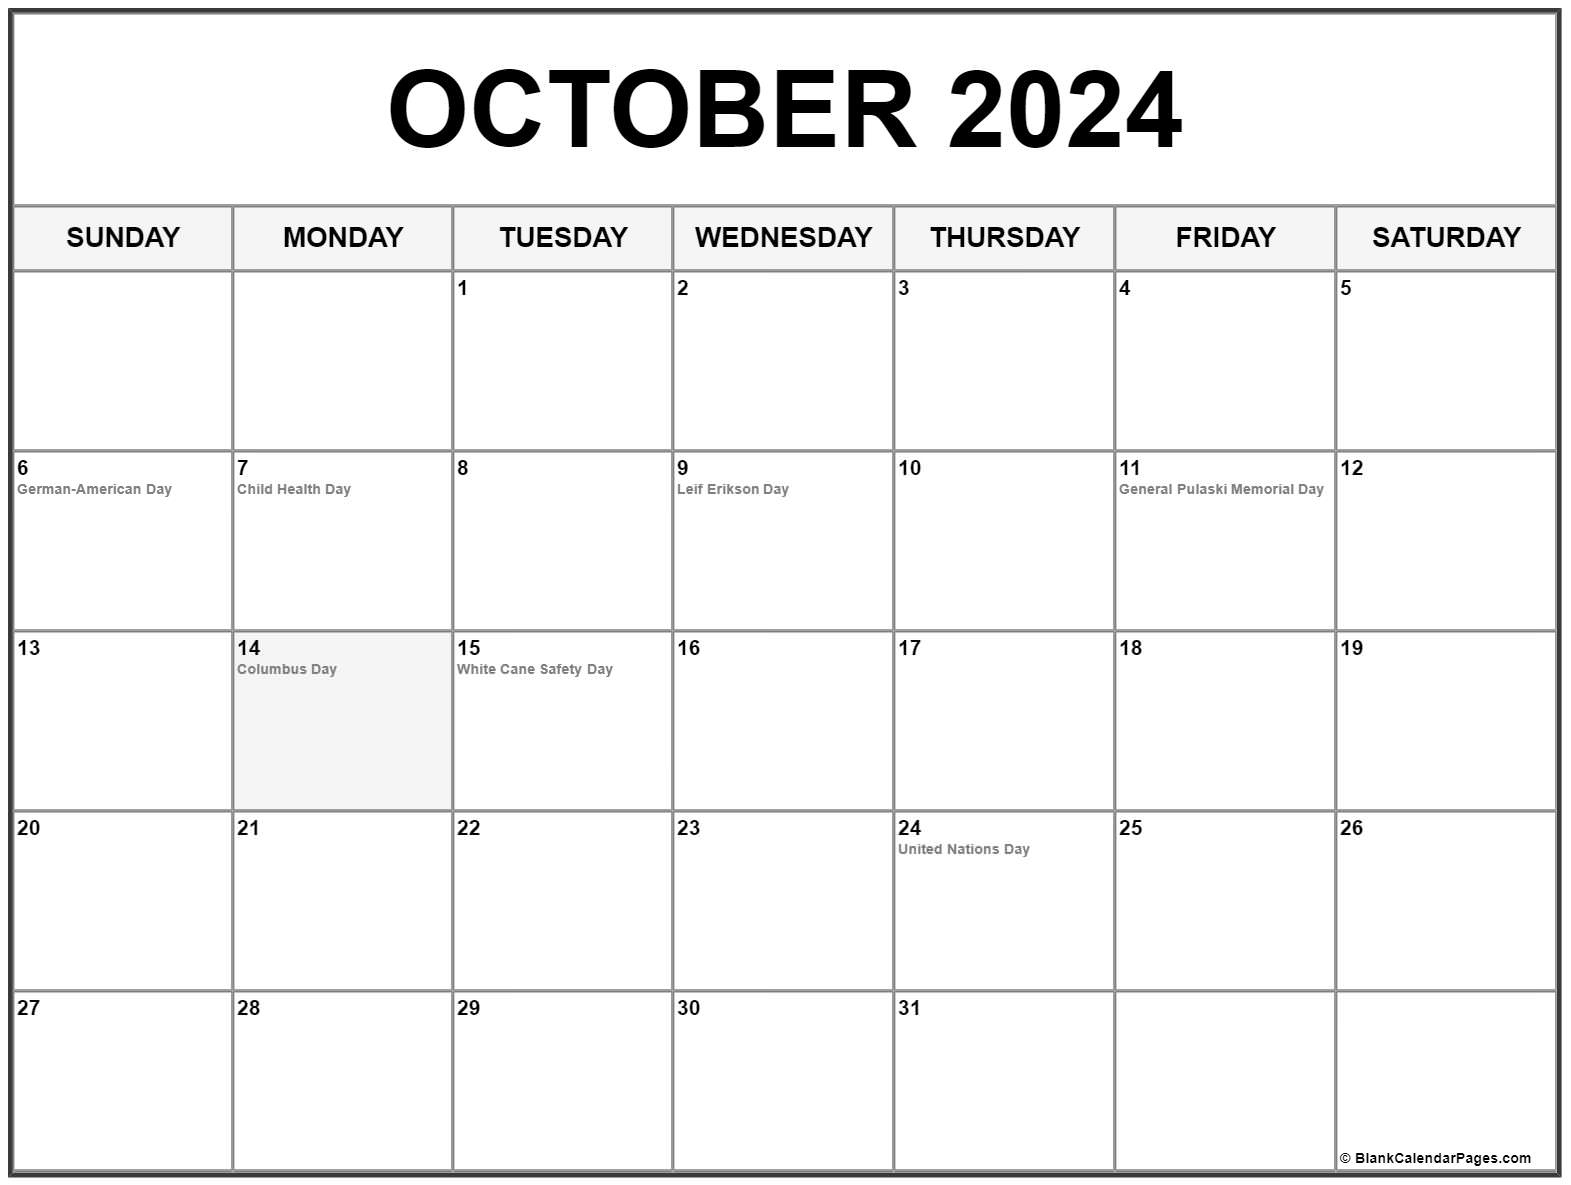 Calendar October 2024 With Holidays Free Printable 2024 Calendar With - Free Printable 2024 Calendar With Holidays Cute